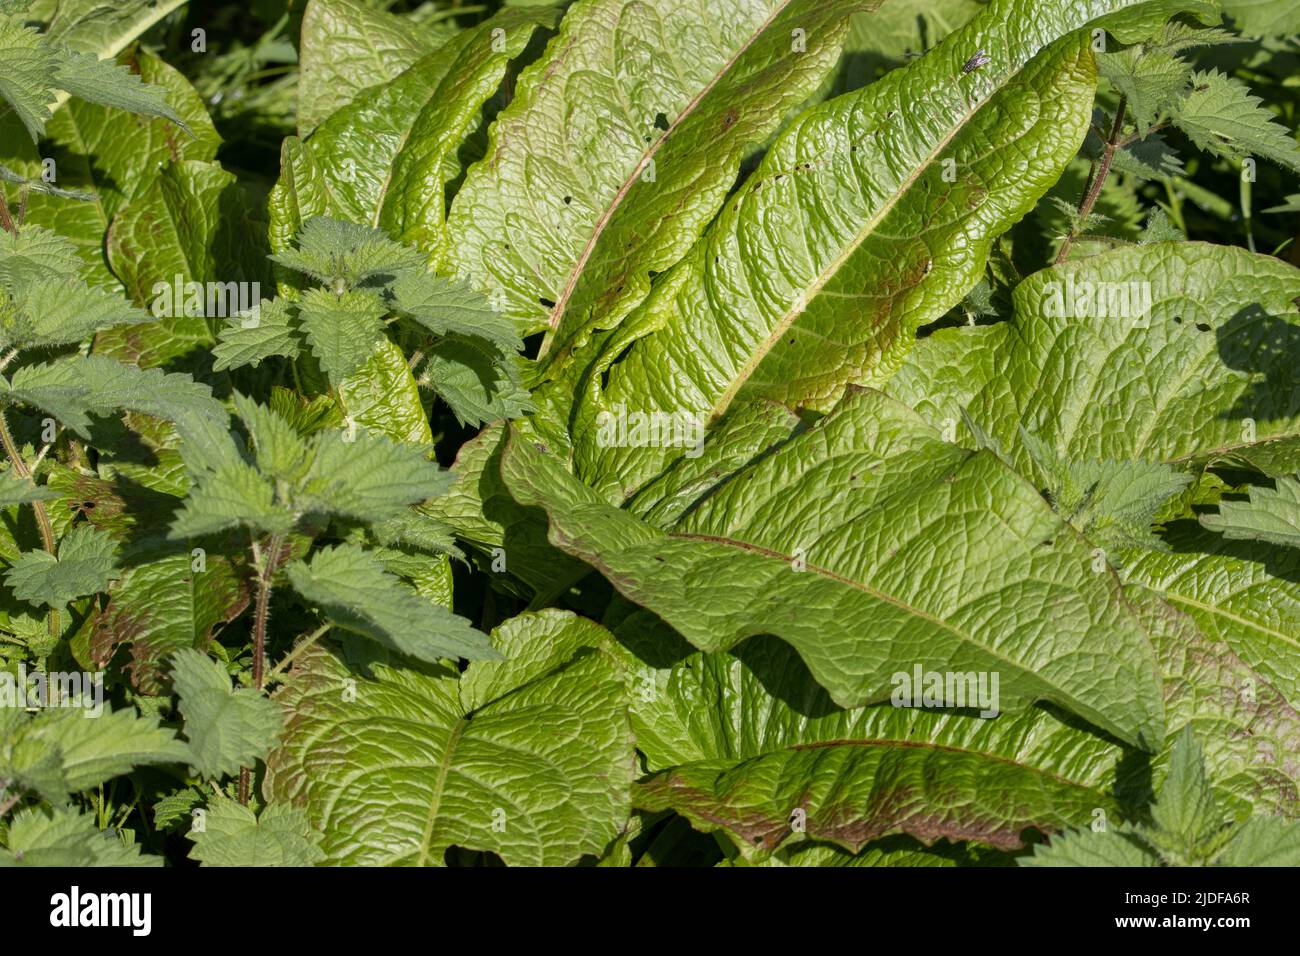 close up of Broad-leaved dock  (Rumex obtusifolius) on a natural green background Stock Photo